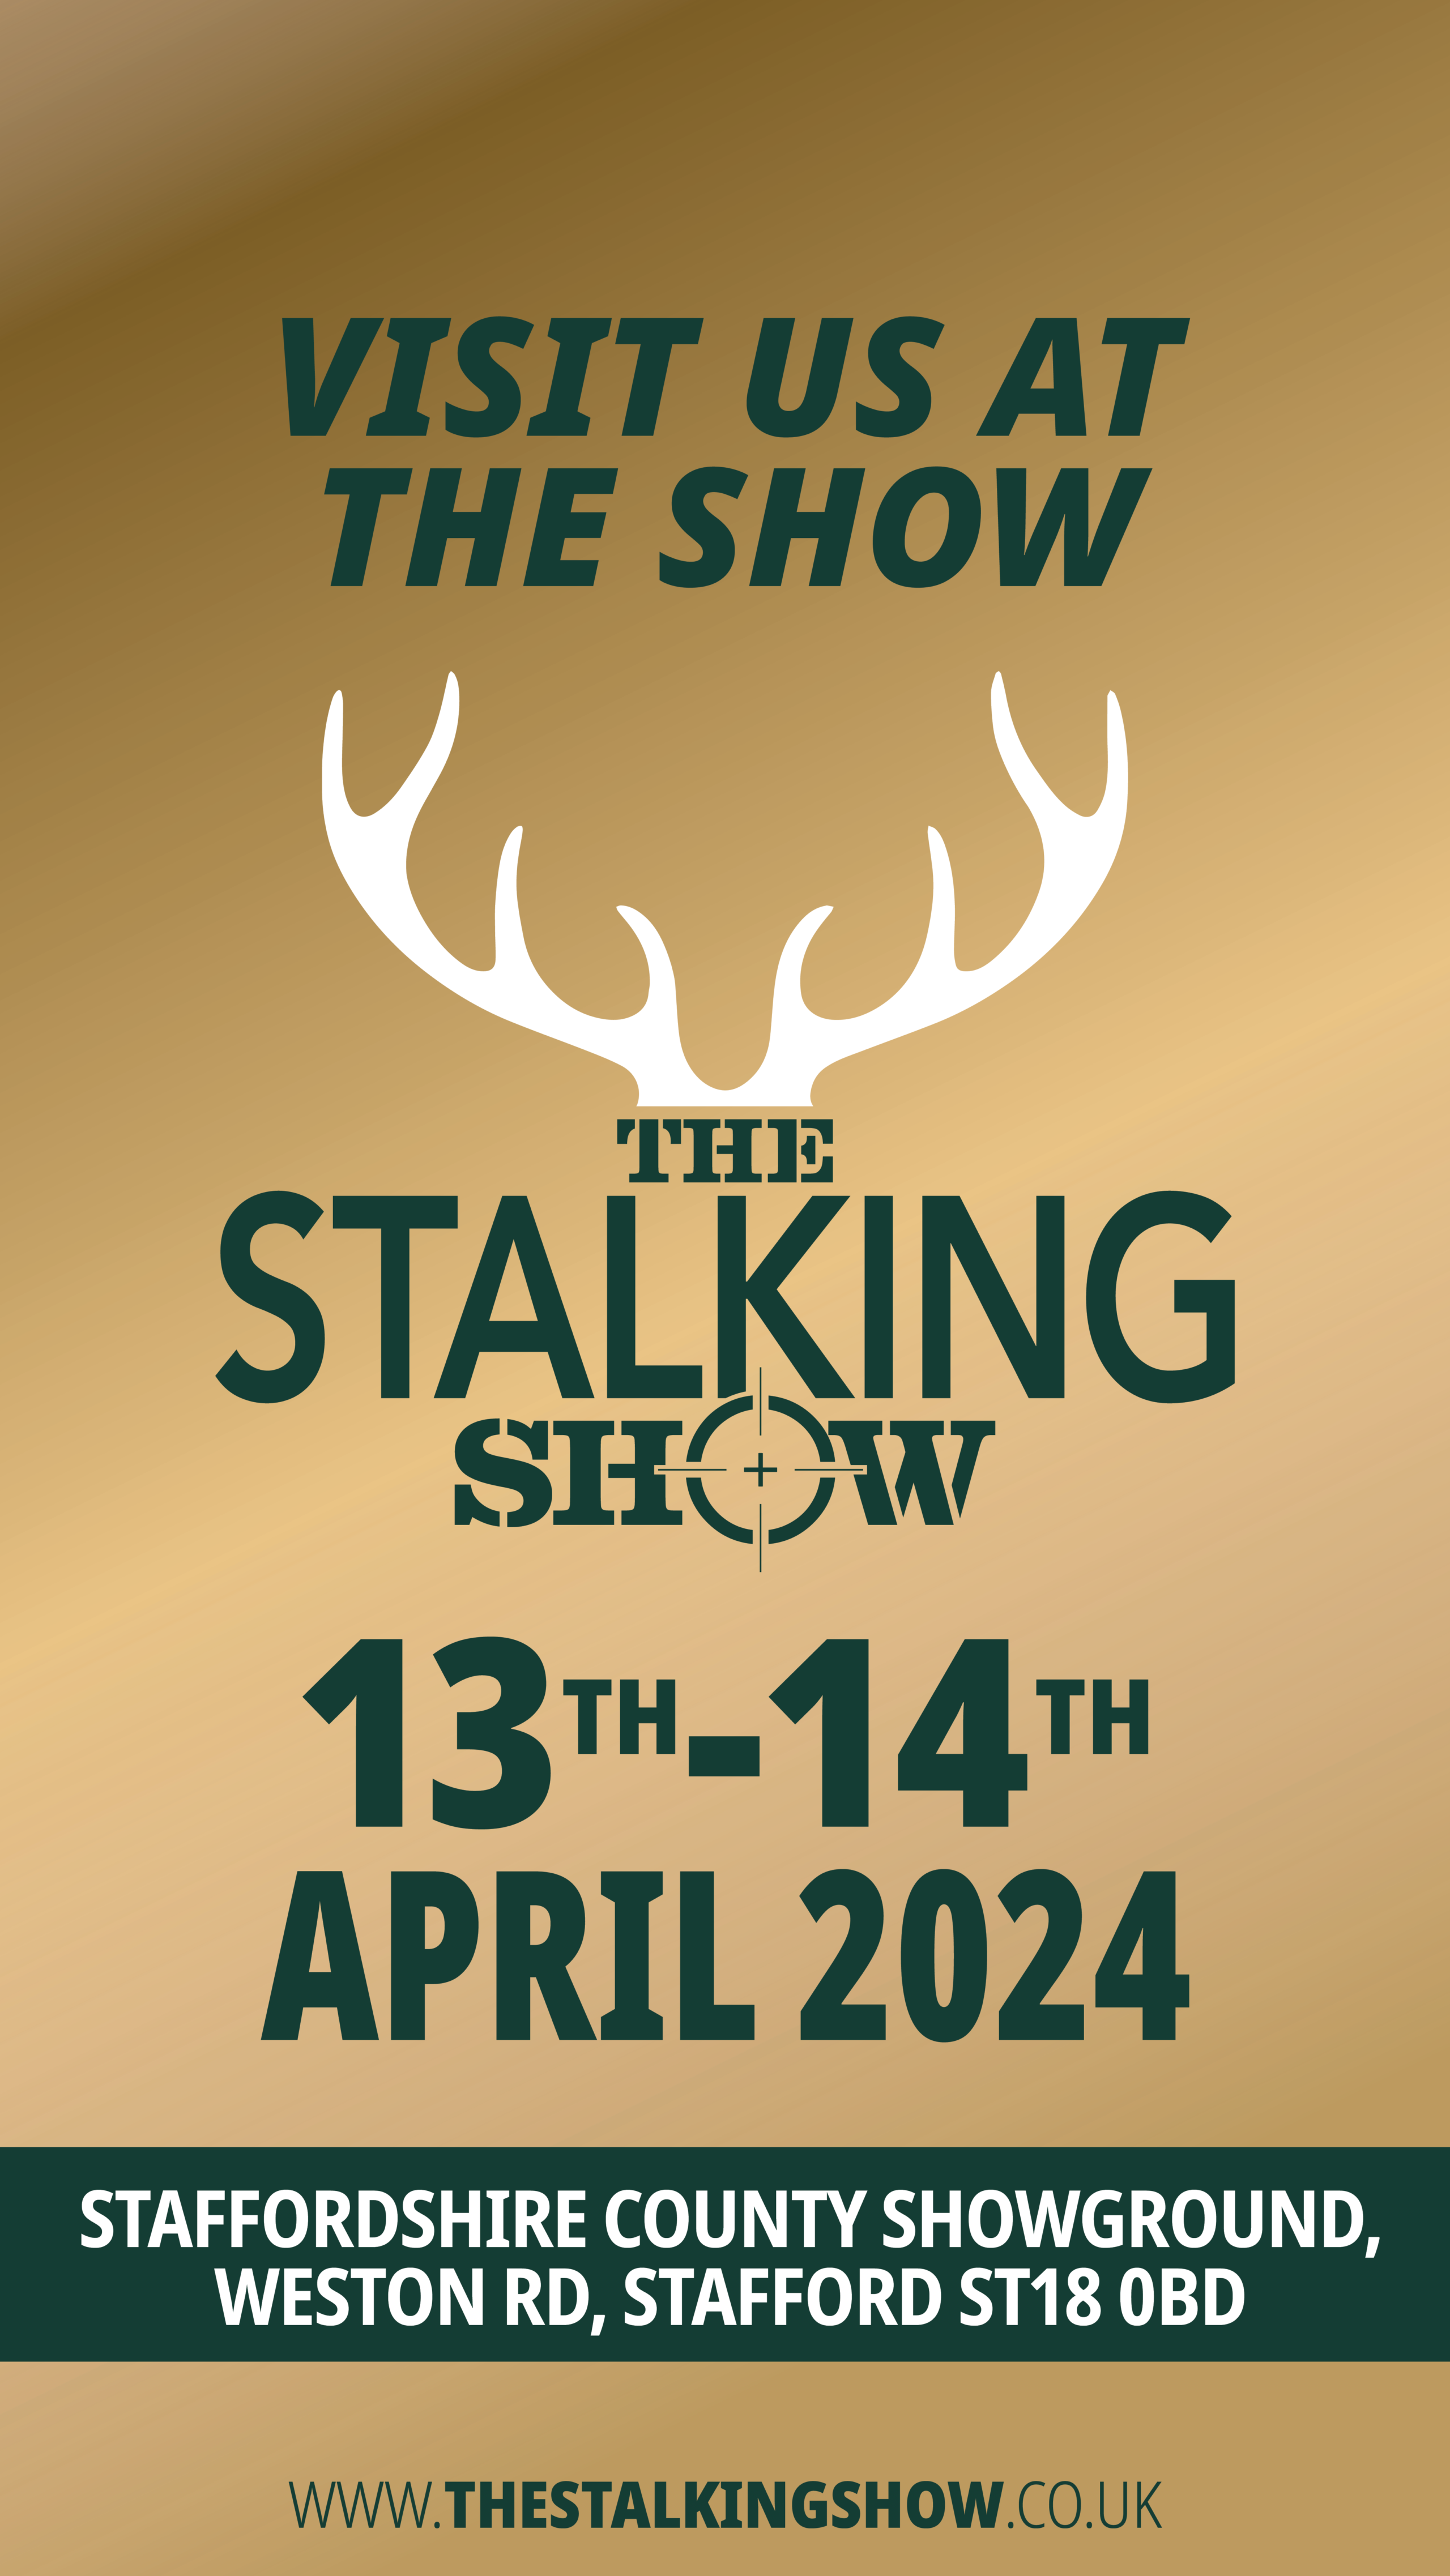 The Stalking Show